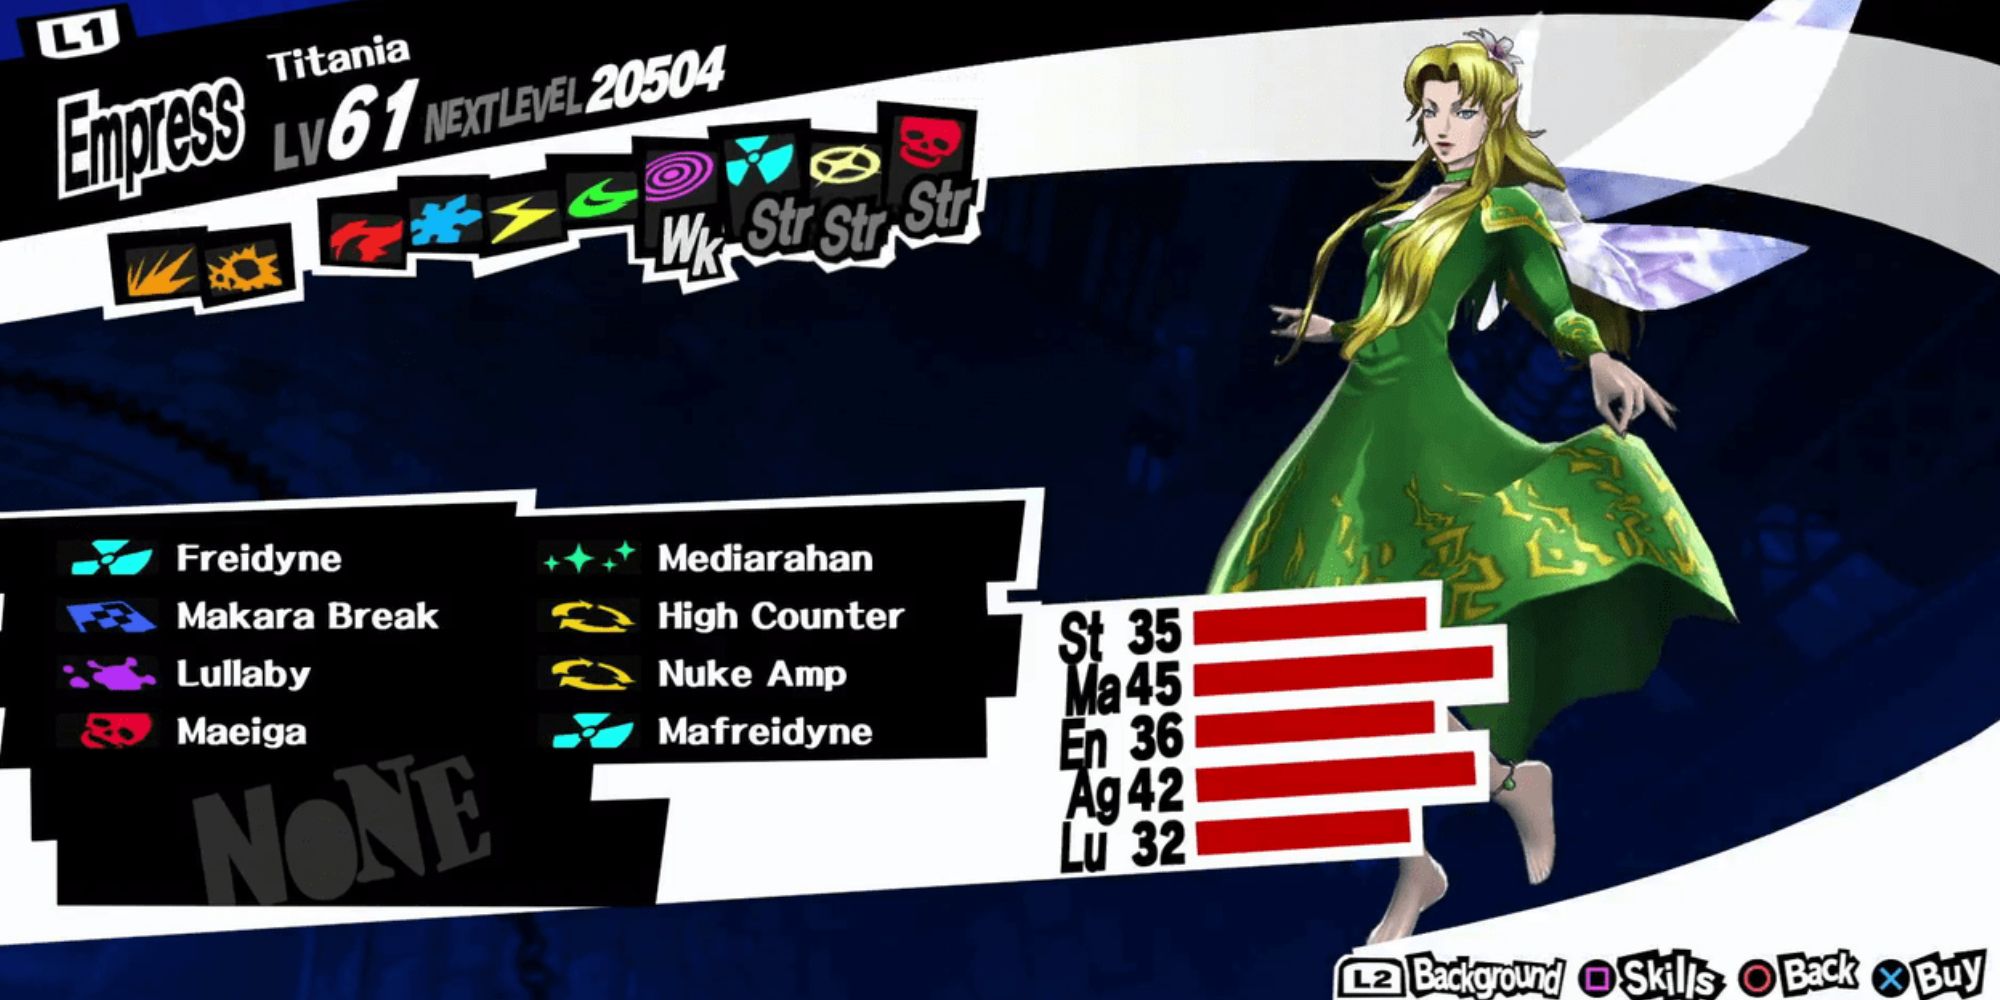 The blonded-haired Persona stands daintily with her skirt pinched in one hand, her abilities and stats in a box to the left. 